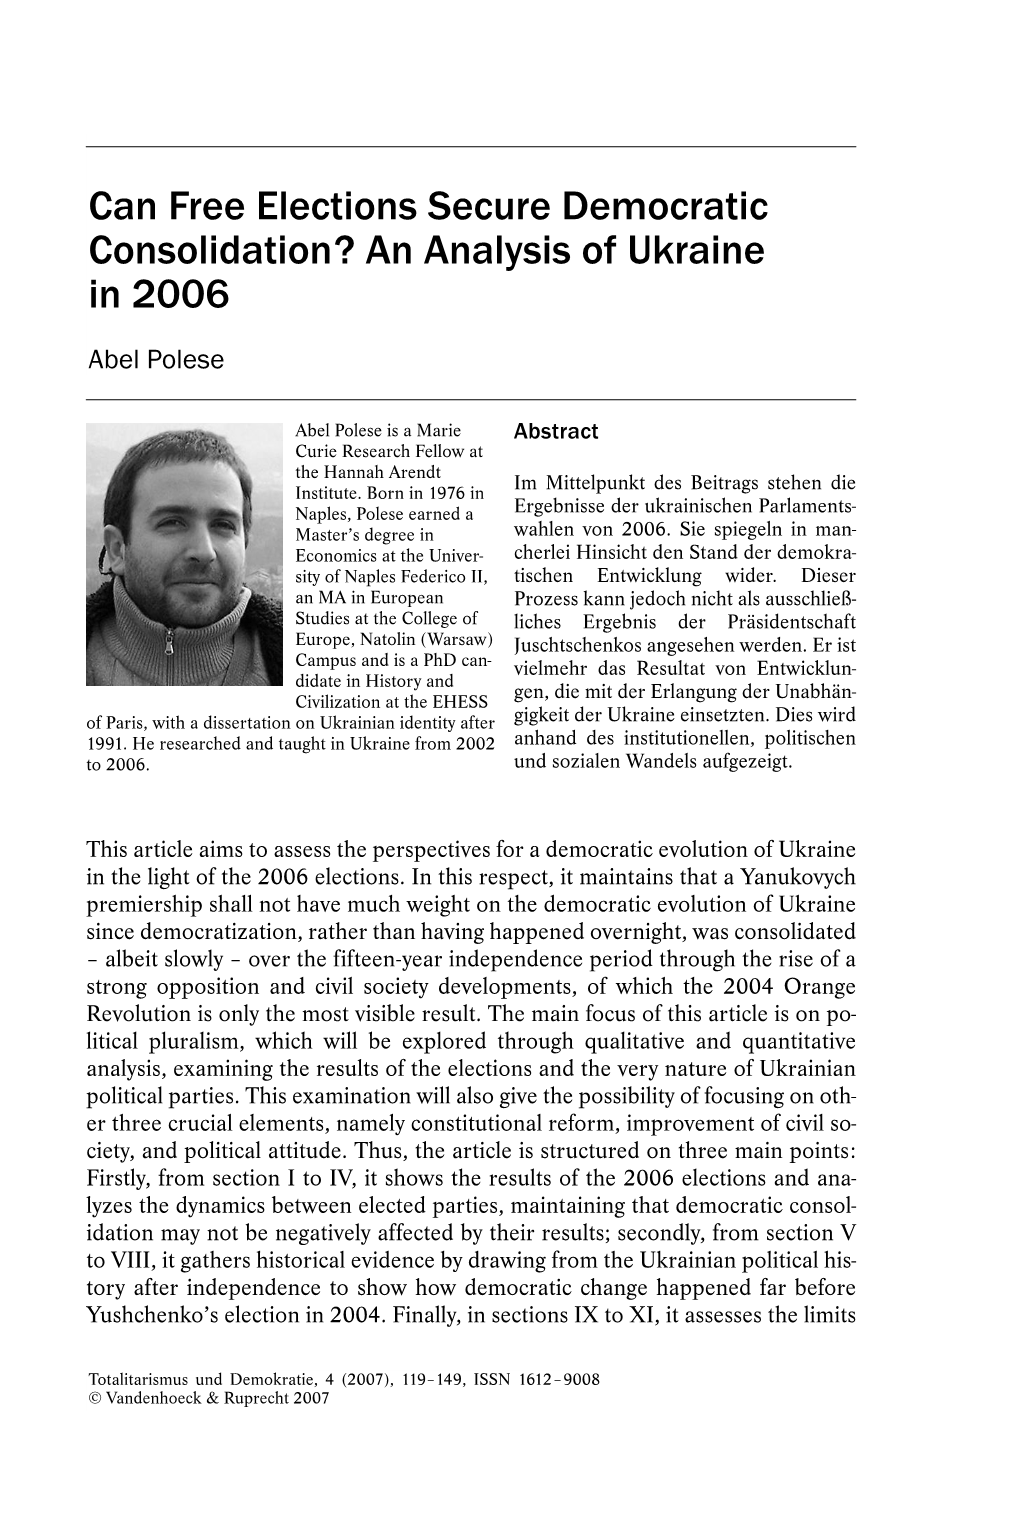 Can Free Elections Secure Democratic Consolidation? an Analysis of Ukraine in 2006